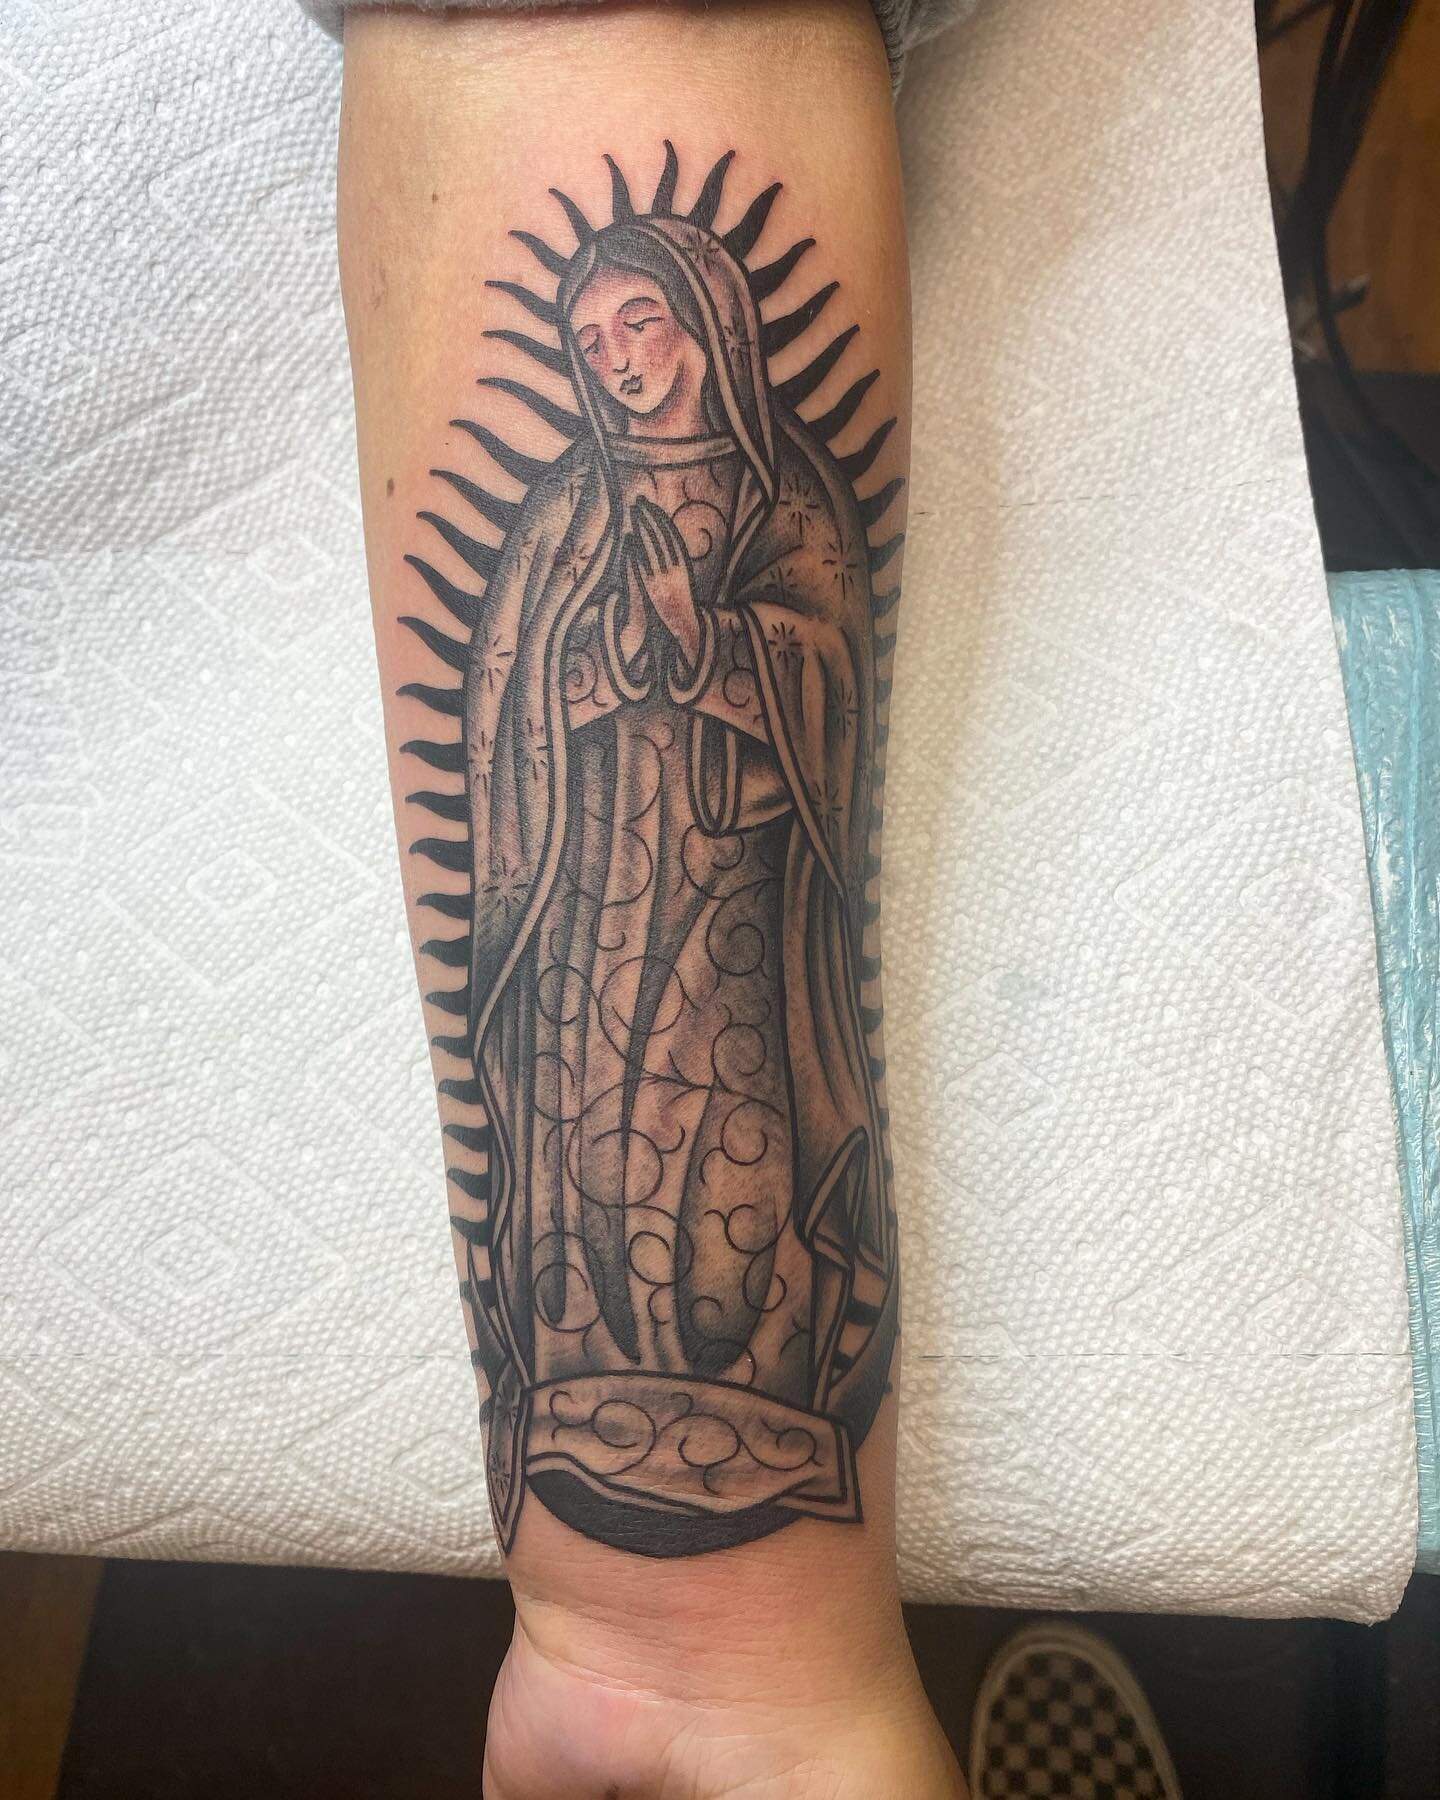 Virgin Guadalupe done by @jinxproof1996 ✨